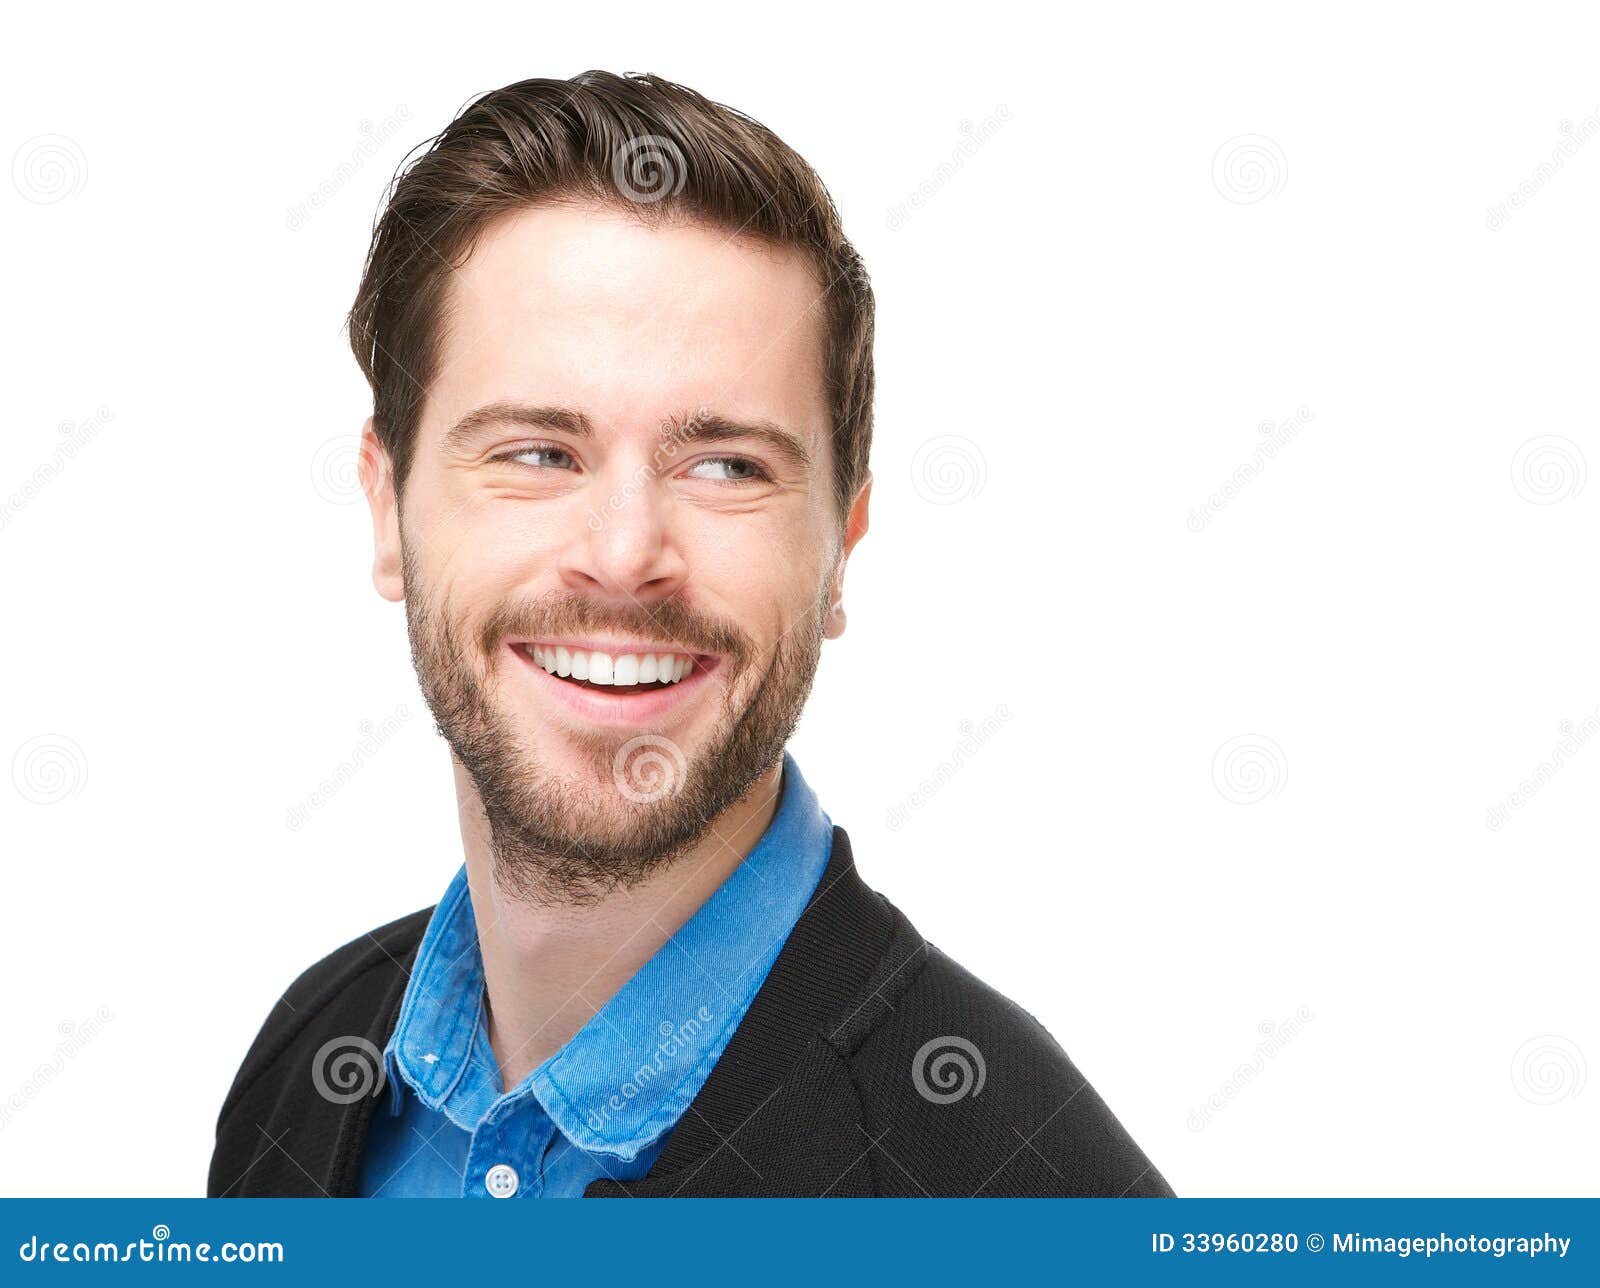 handsome-young-man-happy-expression-his-face-portrait-33960280.jpg